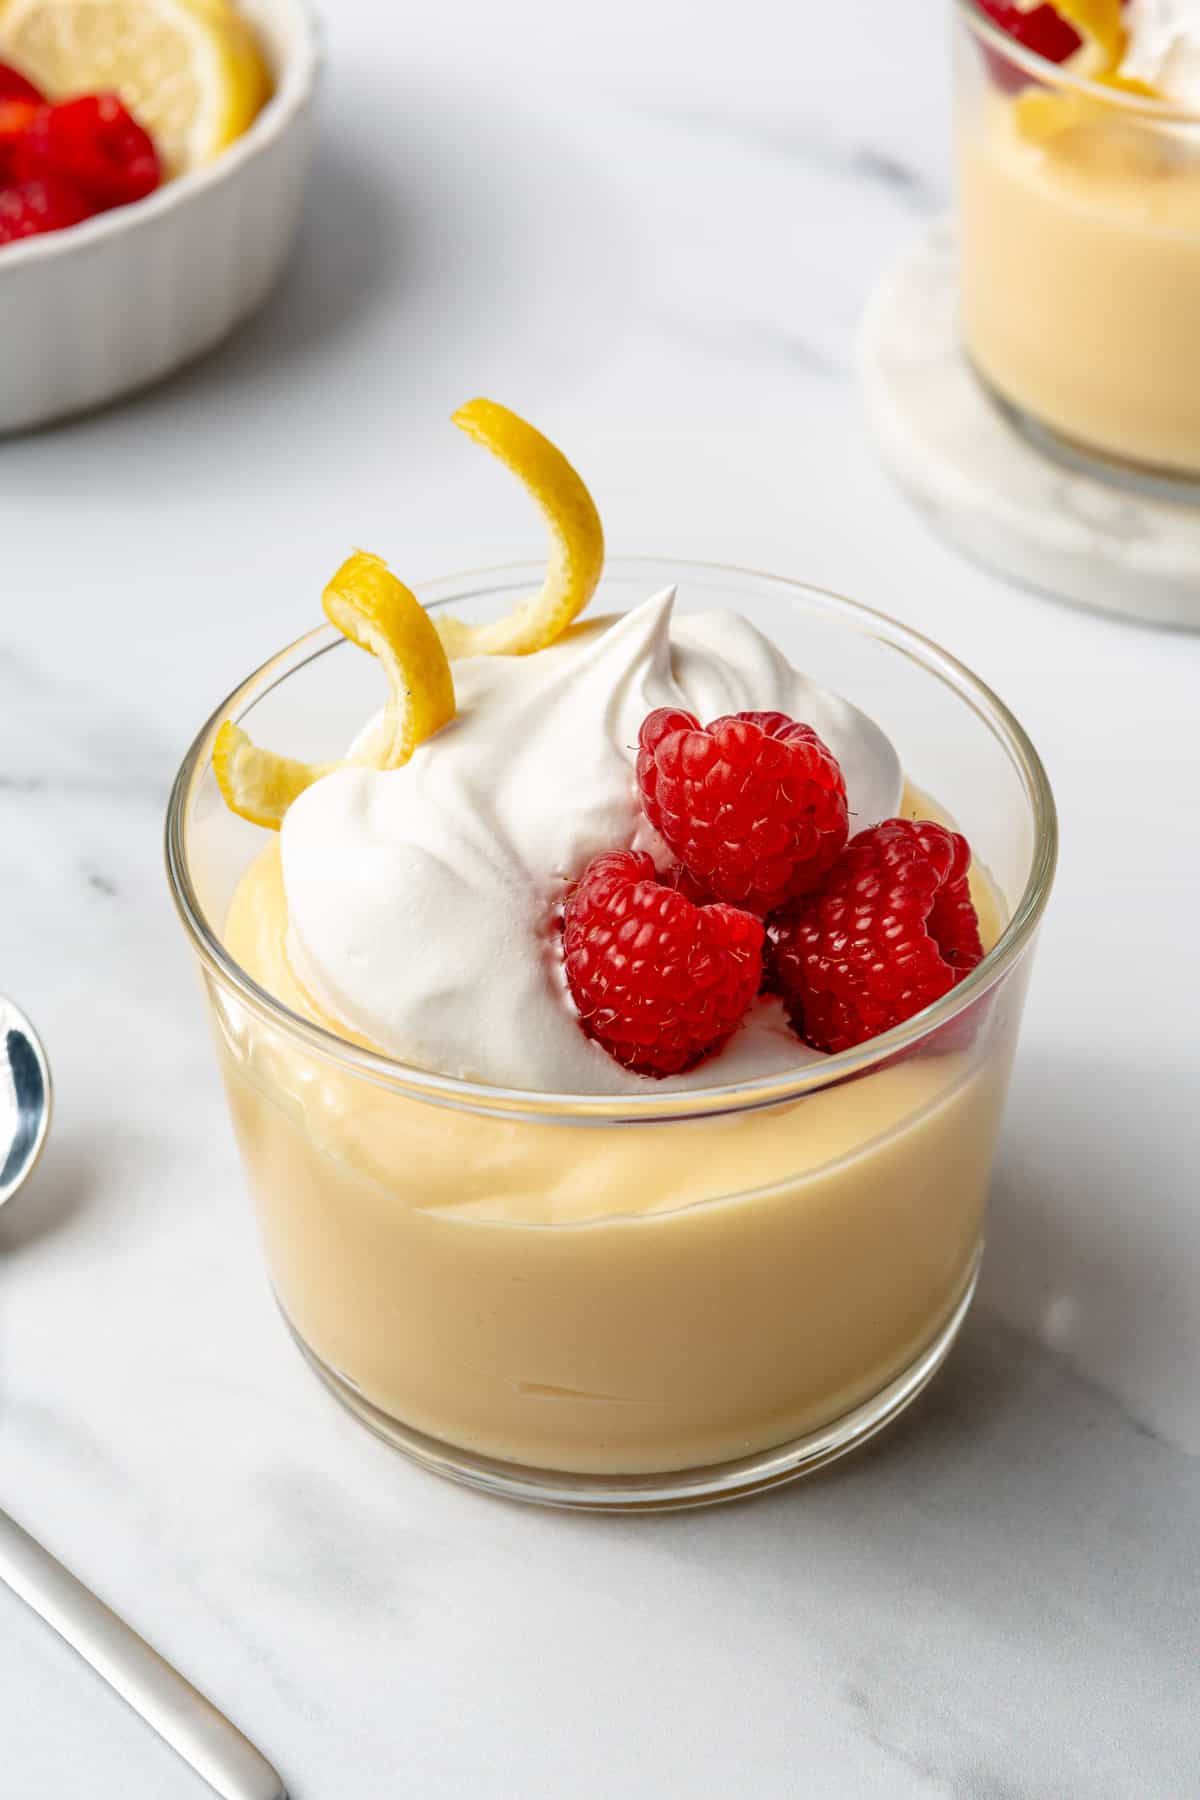 Small dish of lemon pudding topped with whipped cream, fresh raspberries, and lemon zest.